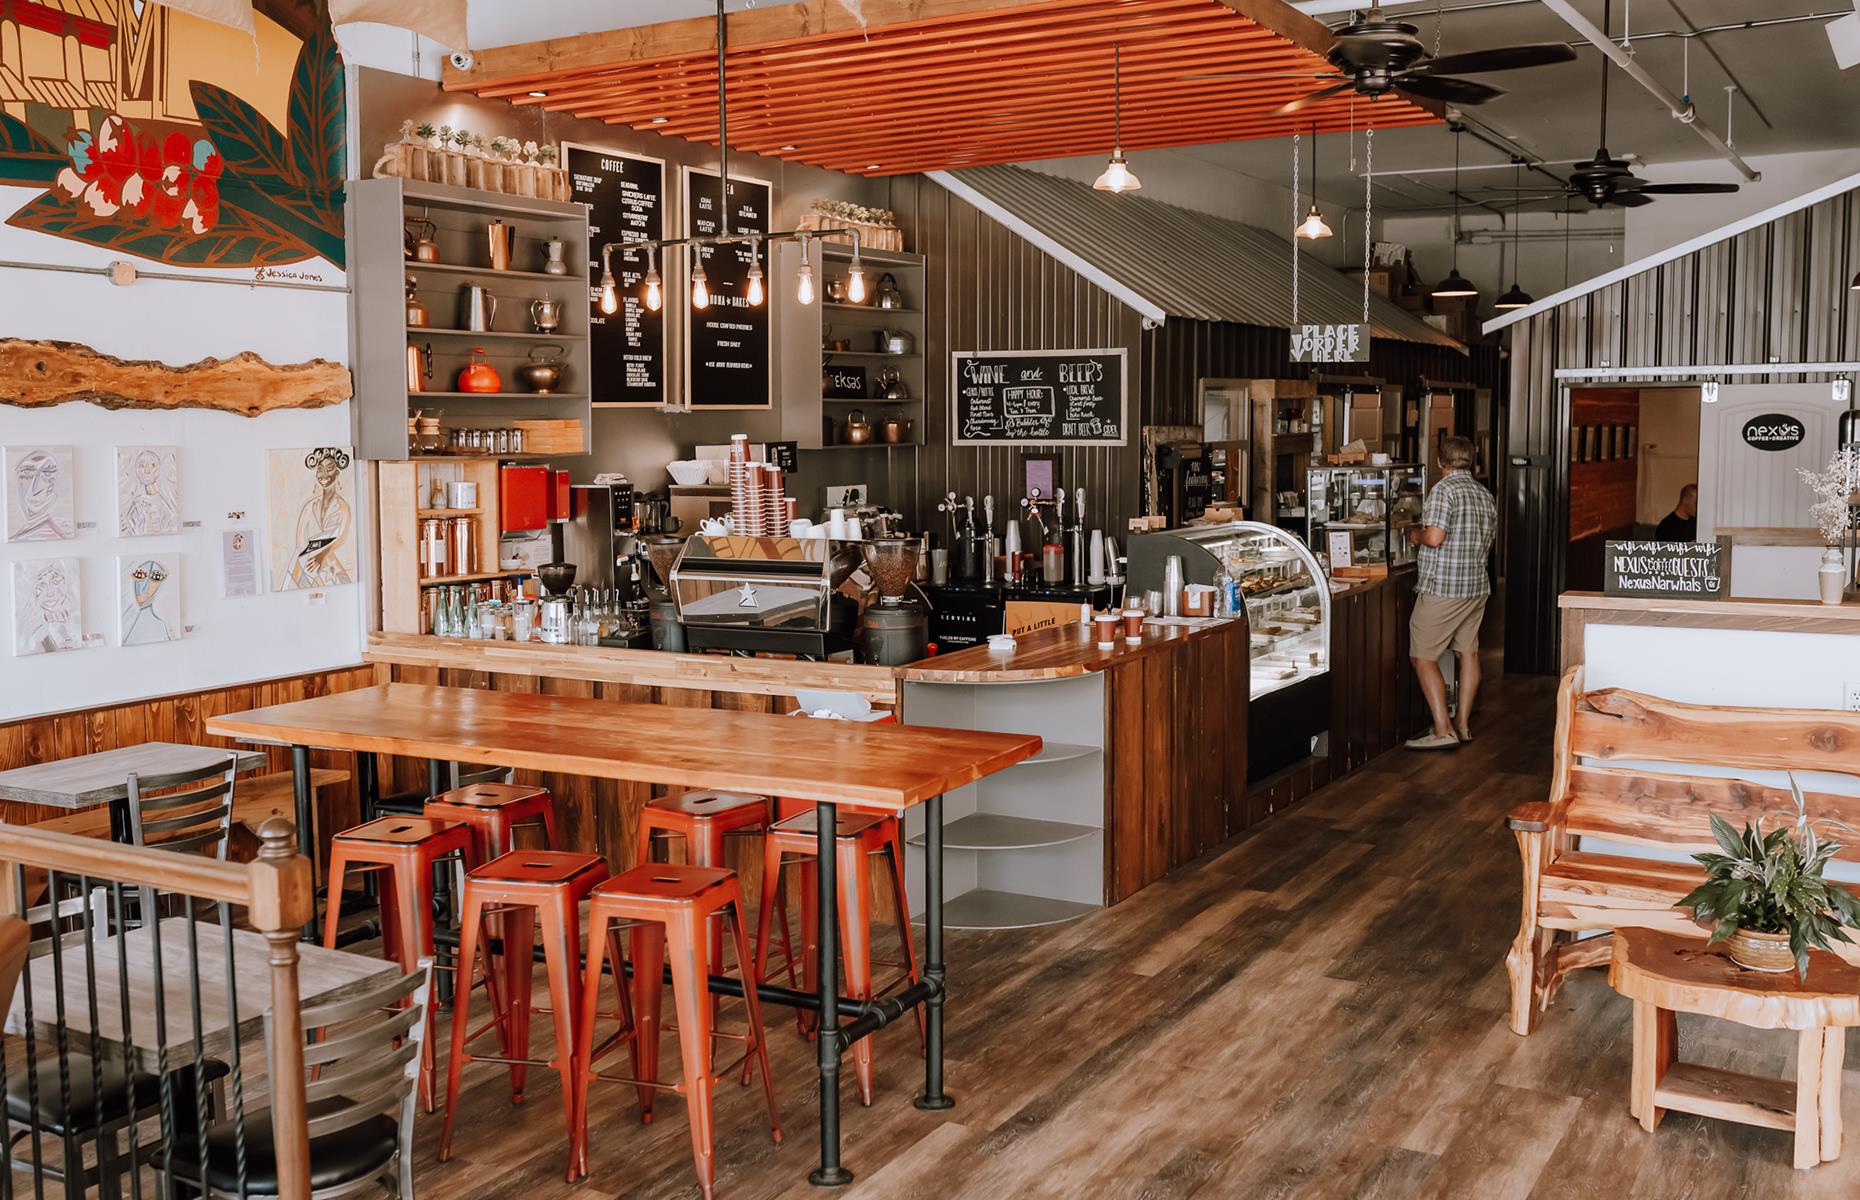 <p><a href="https://www.nexuscoffeear.com/">This coffee hub</a> in Little Rock is where all the city's creatives go to network, get work done or refuel after a day at the laptop. Dogs are allowed here, while humans can enjoy <a href="https://www.yelp.com/biz/nexus-coffee-and-creative-little-rock">exceptionally good</a> coffee, as well as pastries, cakes and cold brew for those warm summer days. Come by for brunch and look out for the fluffy shop dog too. </p>